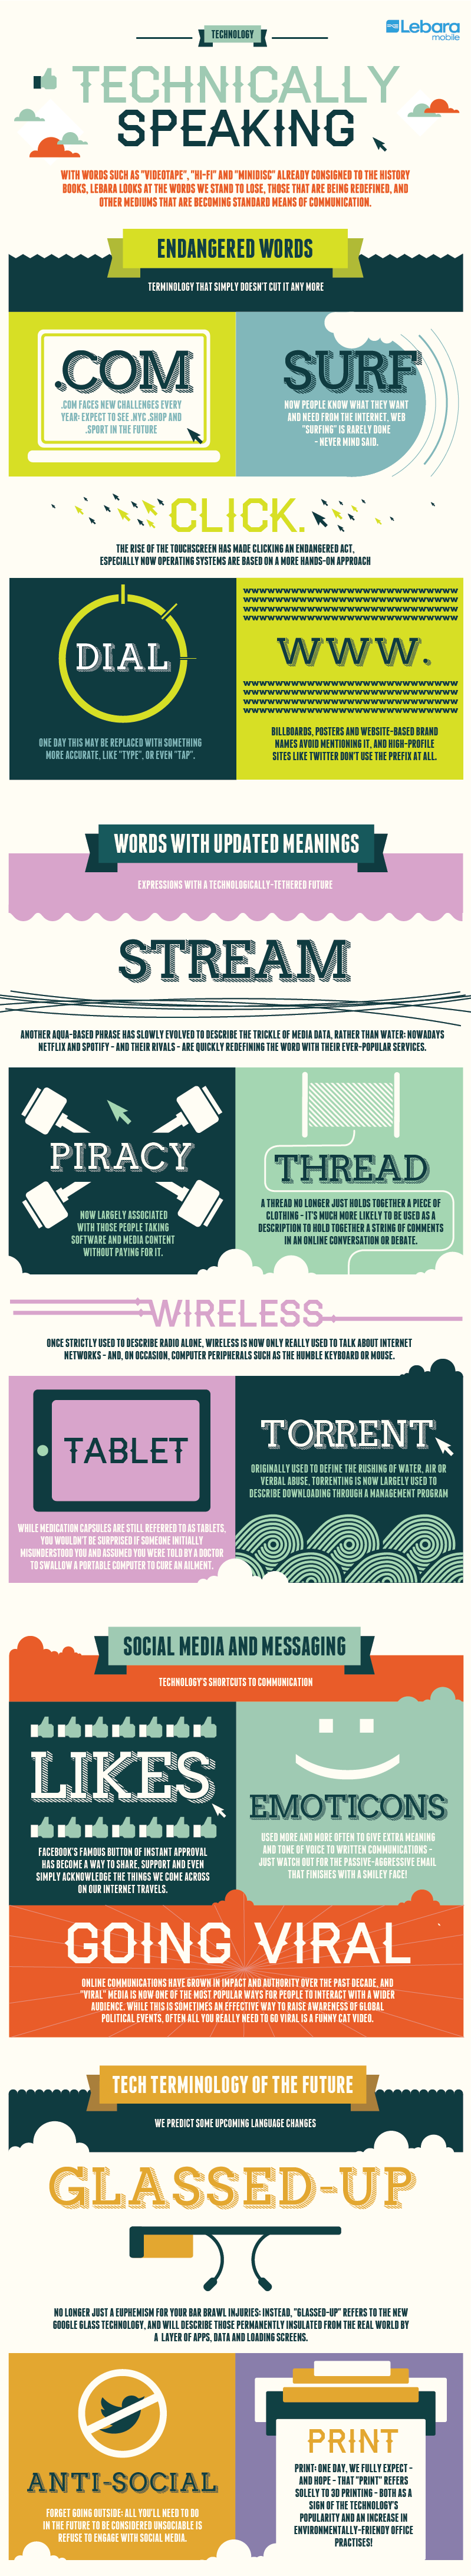 A Guide to New & Outdated Technology Terms